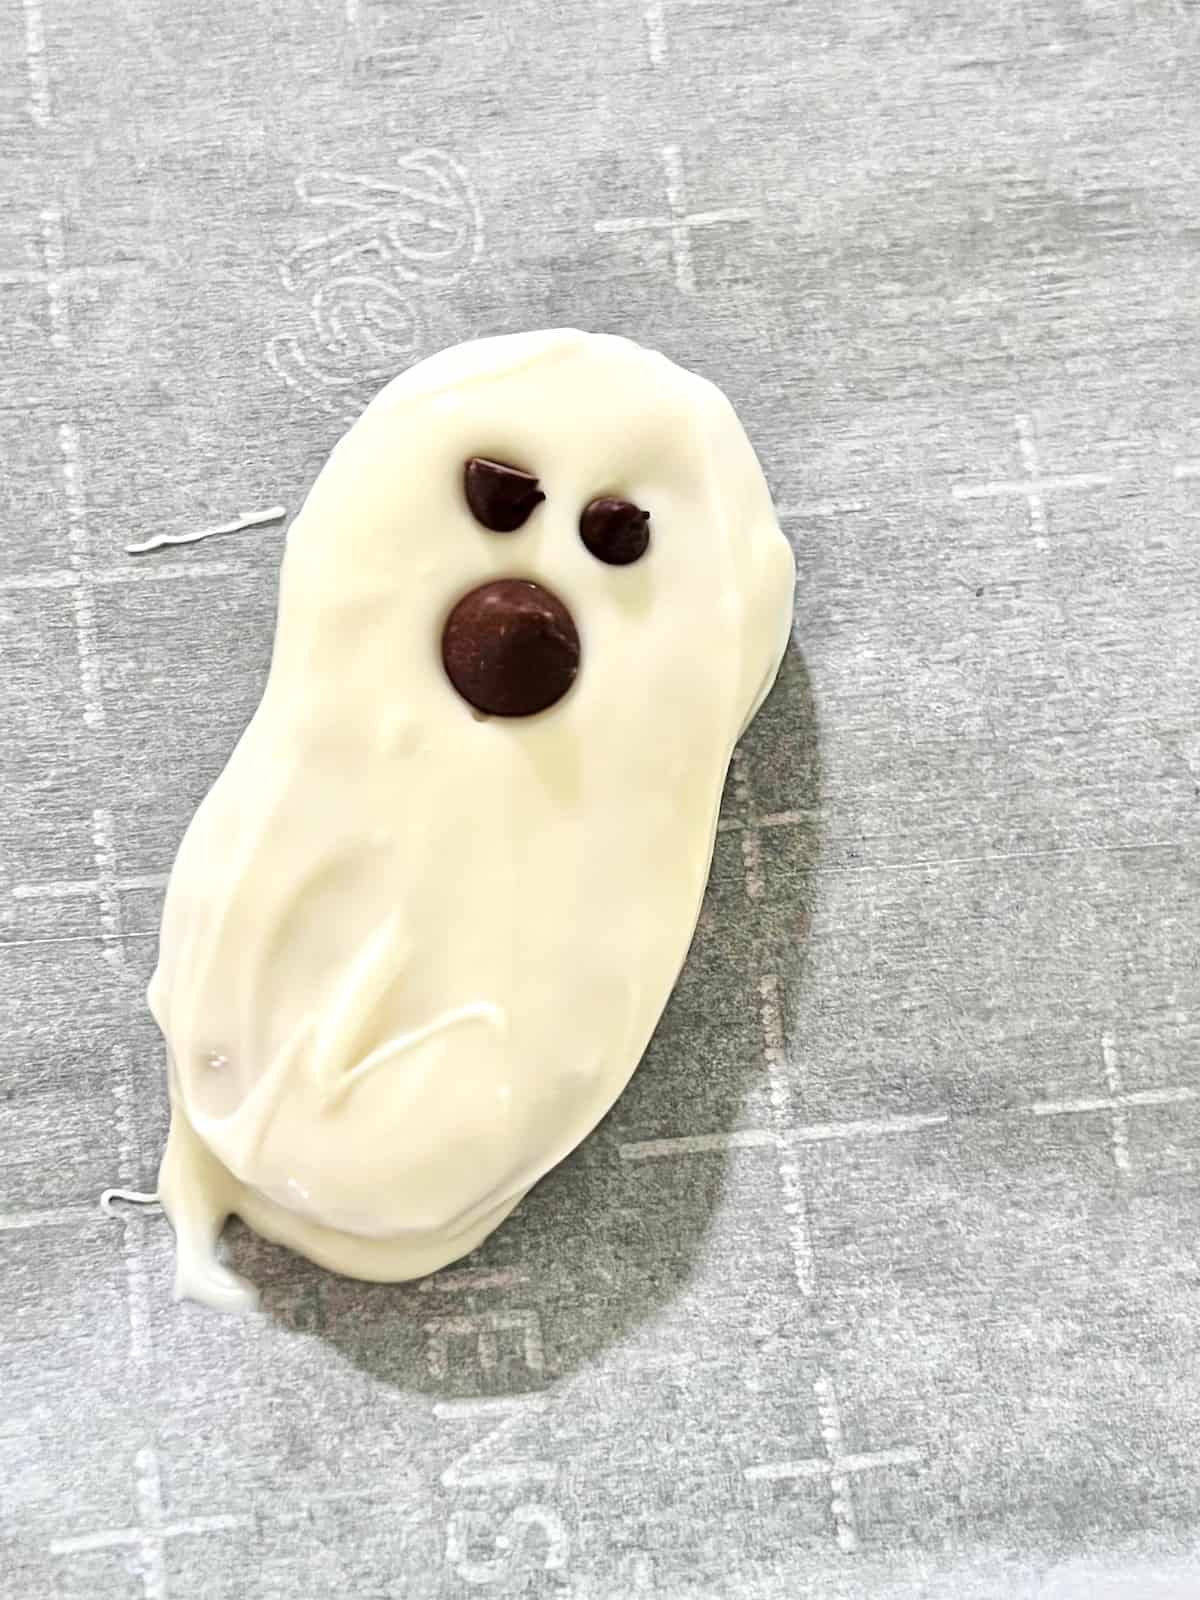 Nutter Butter decorated like a white ghosts with chcoolate chip eyes and mouth on parchment.